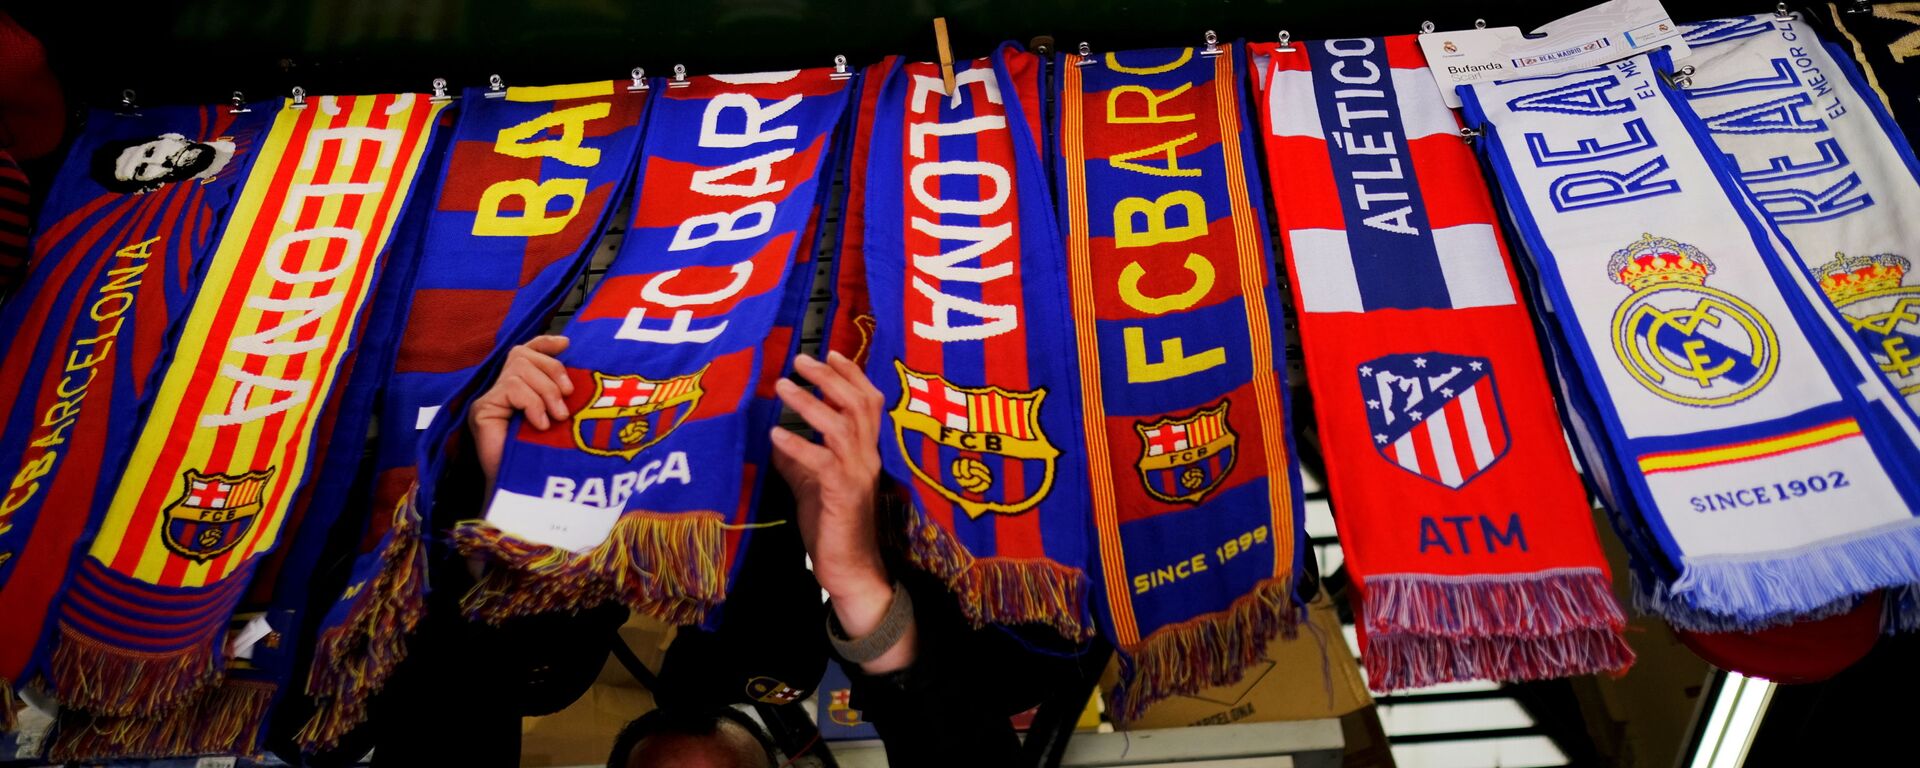 Soccer Football - FC Barcelona, Atletico Madrid and Real Madrid scarves are displayed inside a store at Las Ramblas as twelve of Europe's top football clubs launch a breakaway Super League - Barcelona, Spain - April 19, 2021 - اسپوتنیک افغانستان  , 1920, 17.10.2021